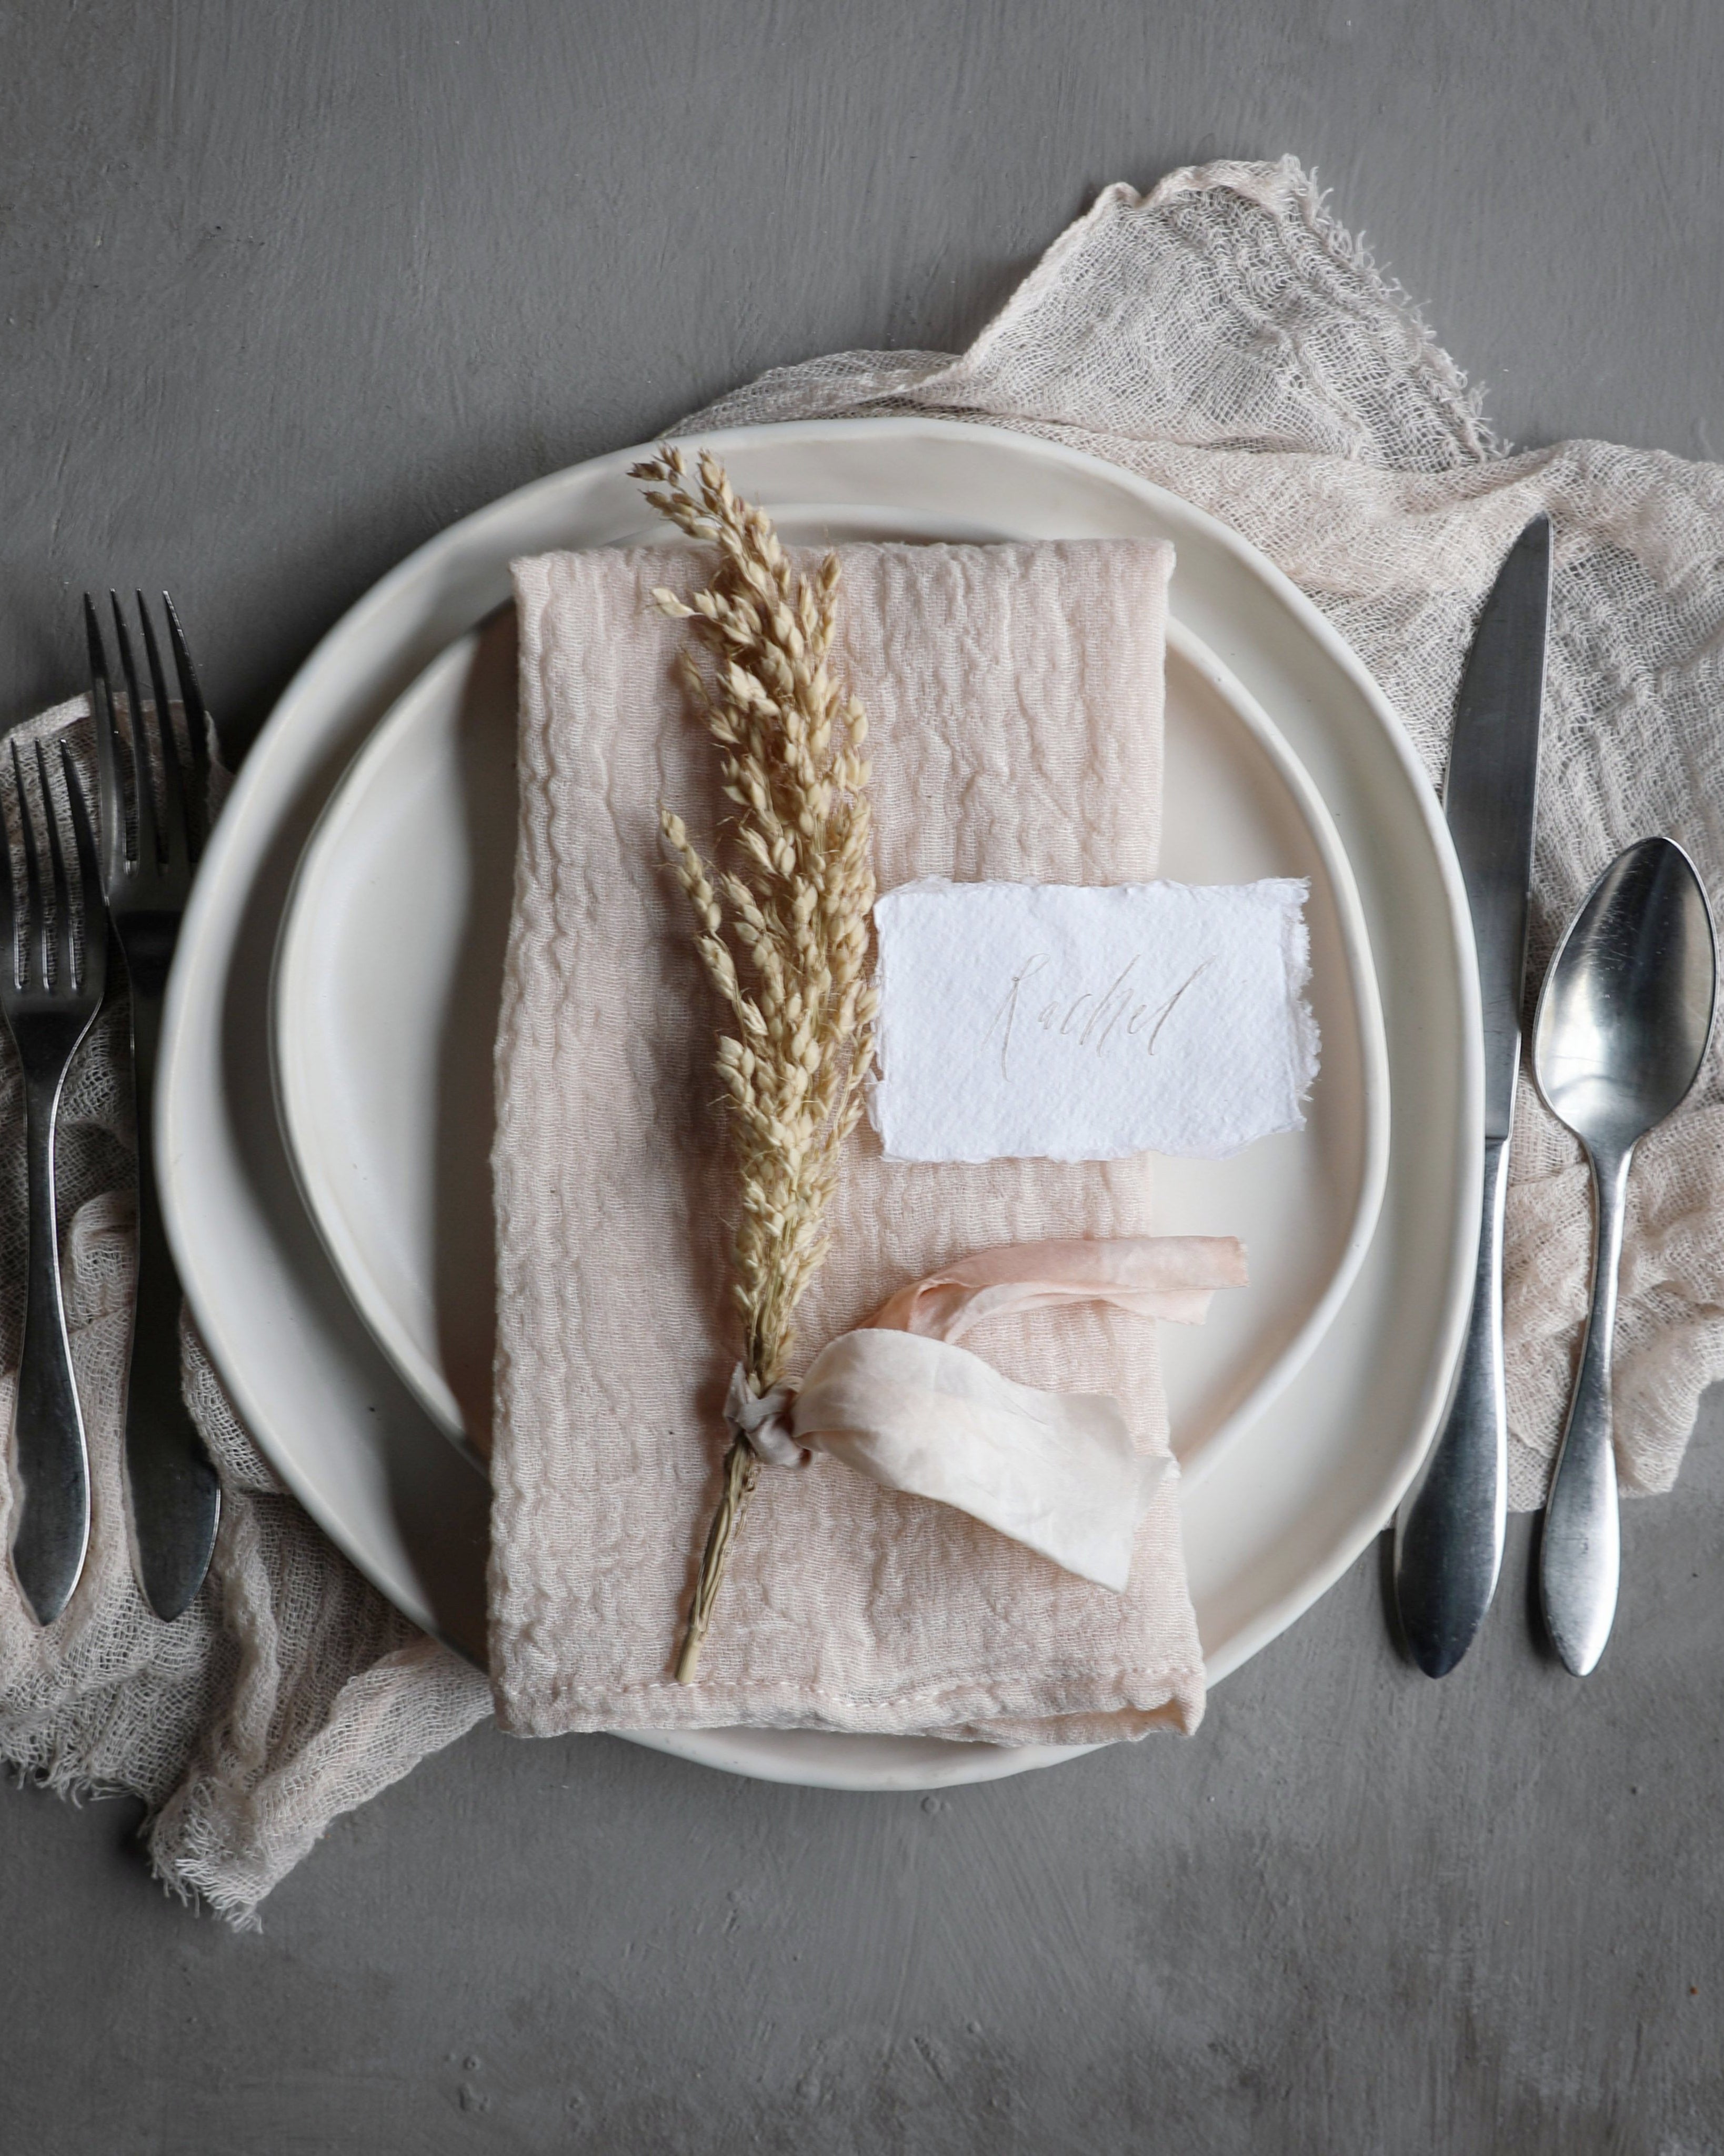 Example of a place setting idea with Silk and Willow Hand-loomed cotton napkins and handmade ceramic plates